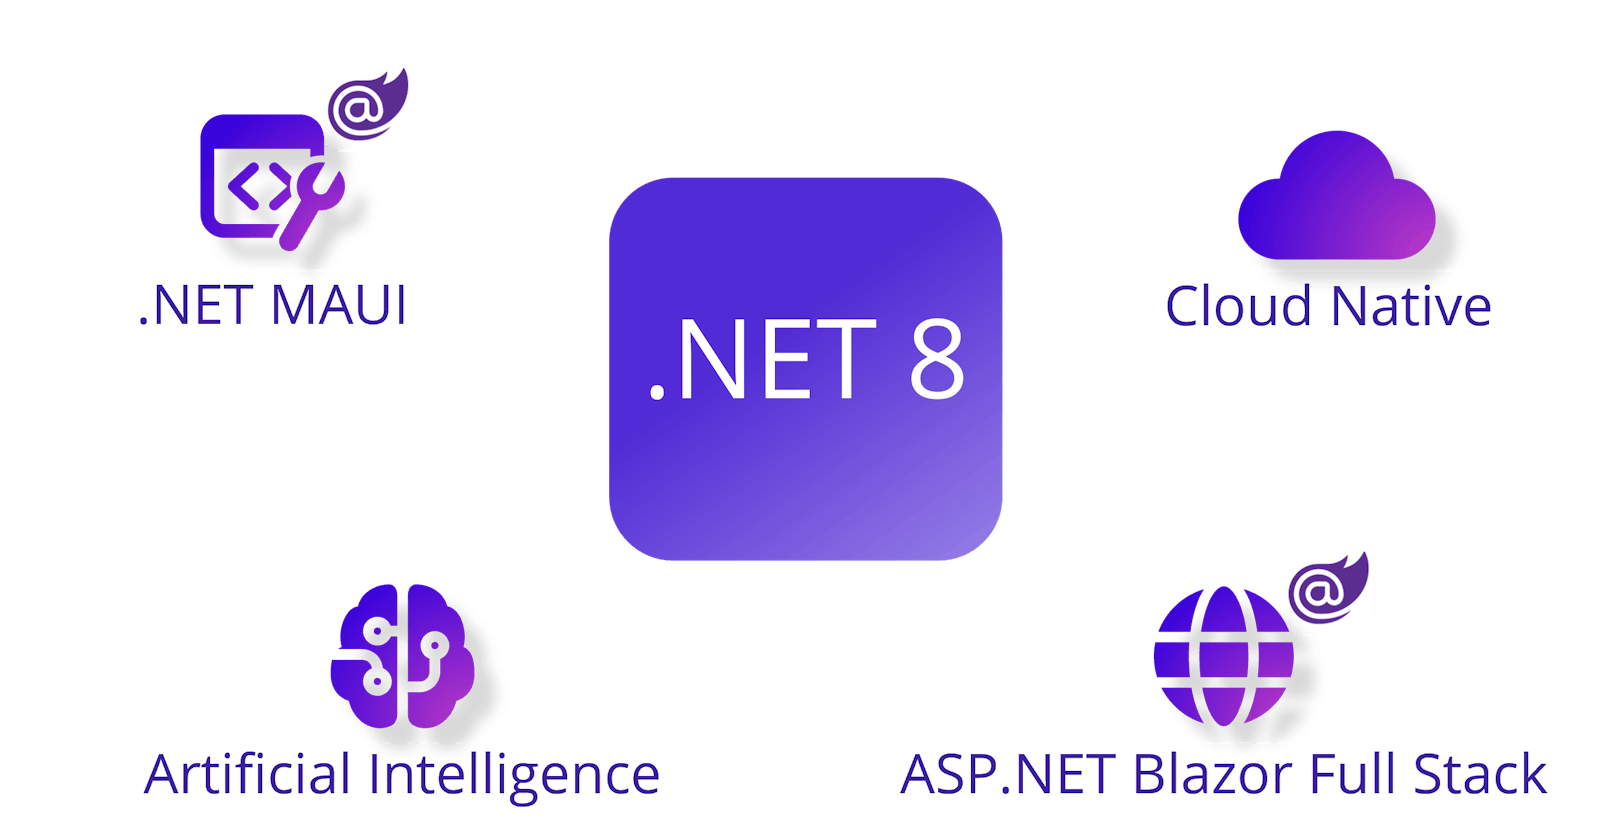 What’s new in .NET 8